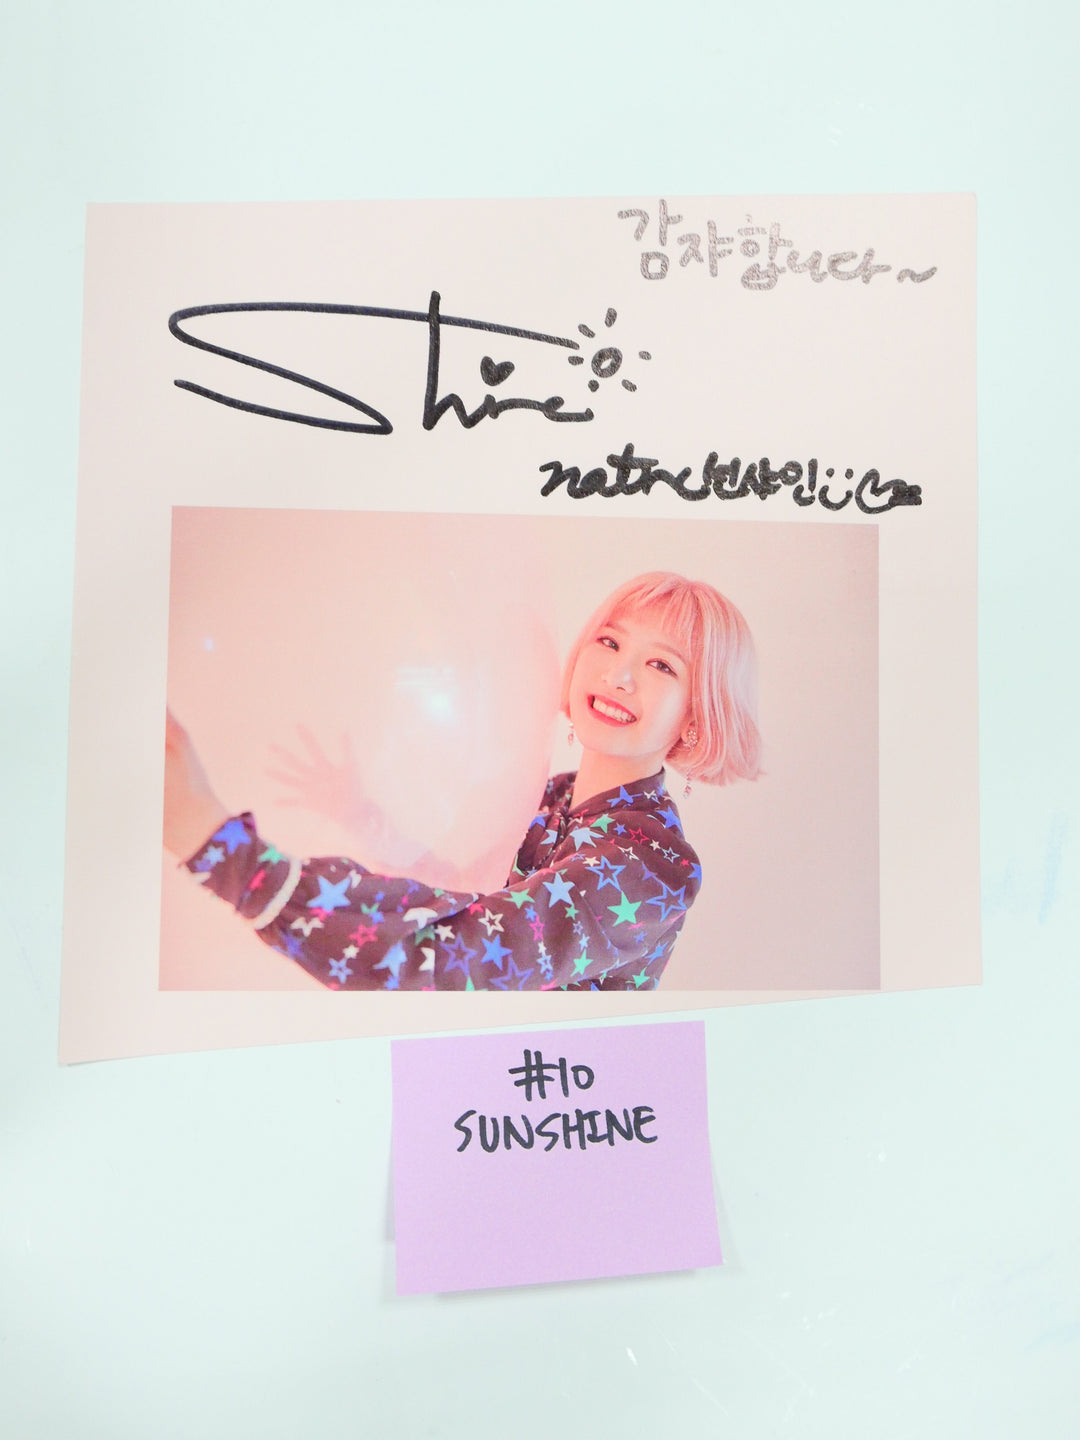 Nature - A Cut Page From Fansign Event Albums (UCHAE, SUNSHINE, GAGA)